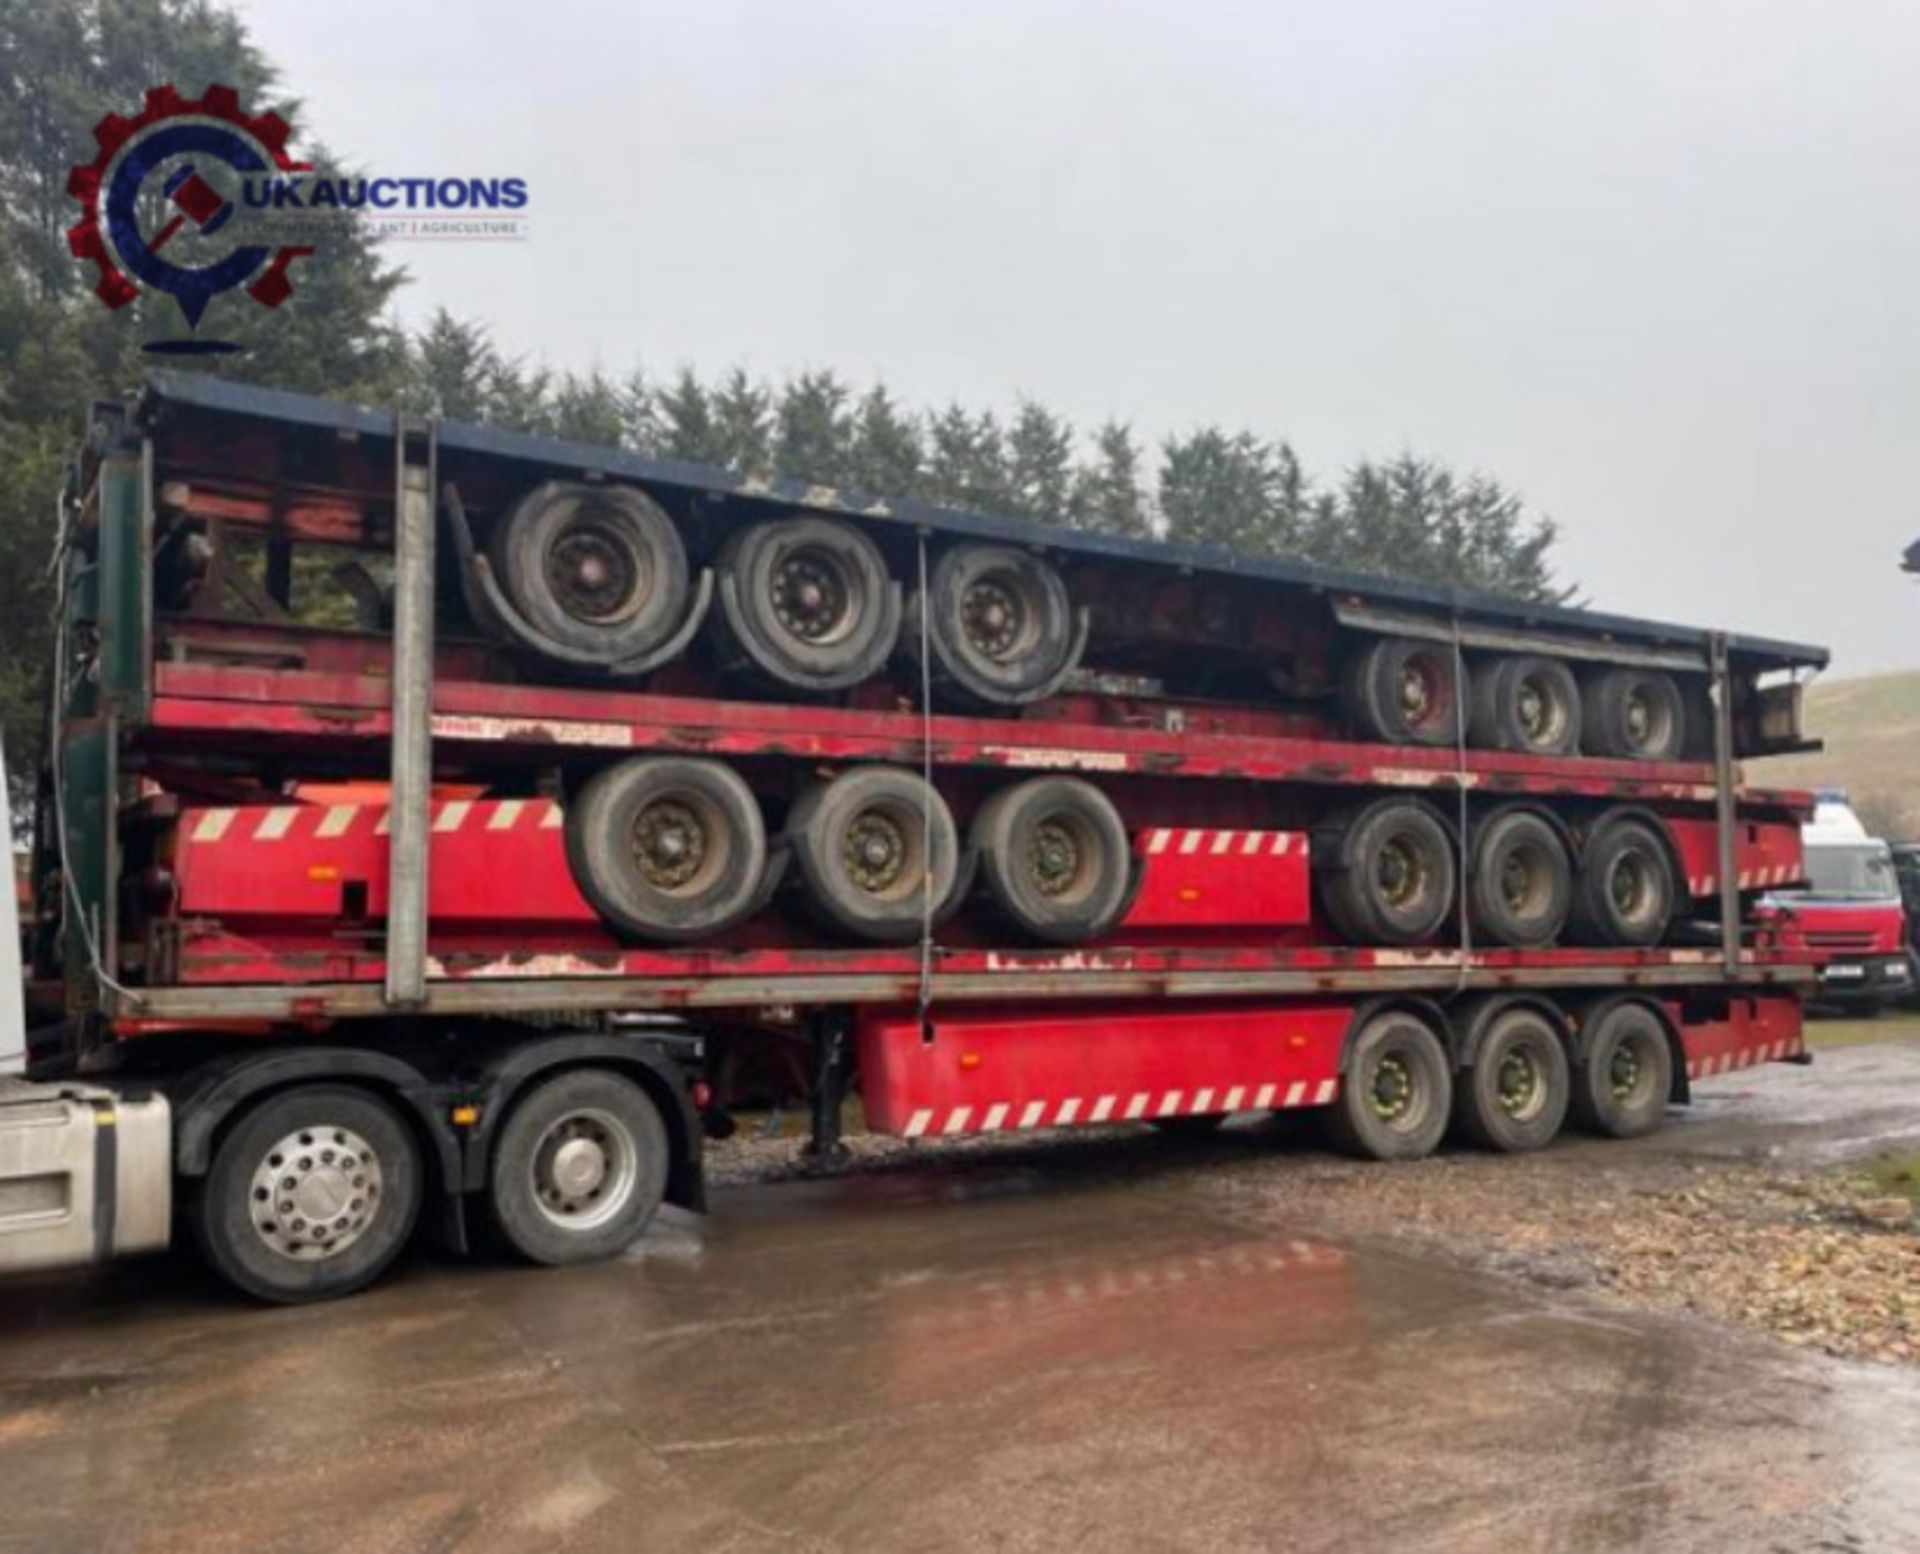 STACK OF 5 SDC TRAILERS